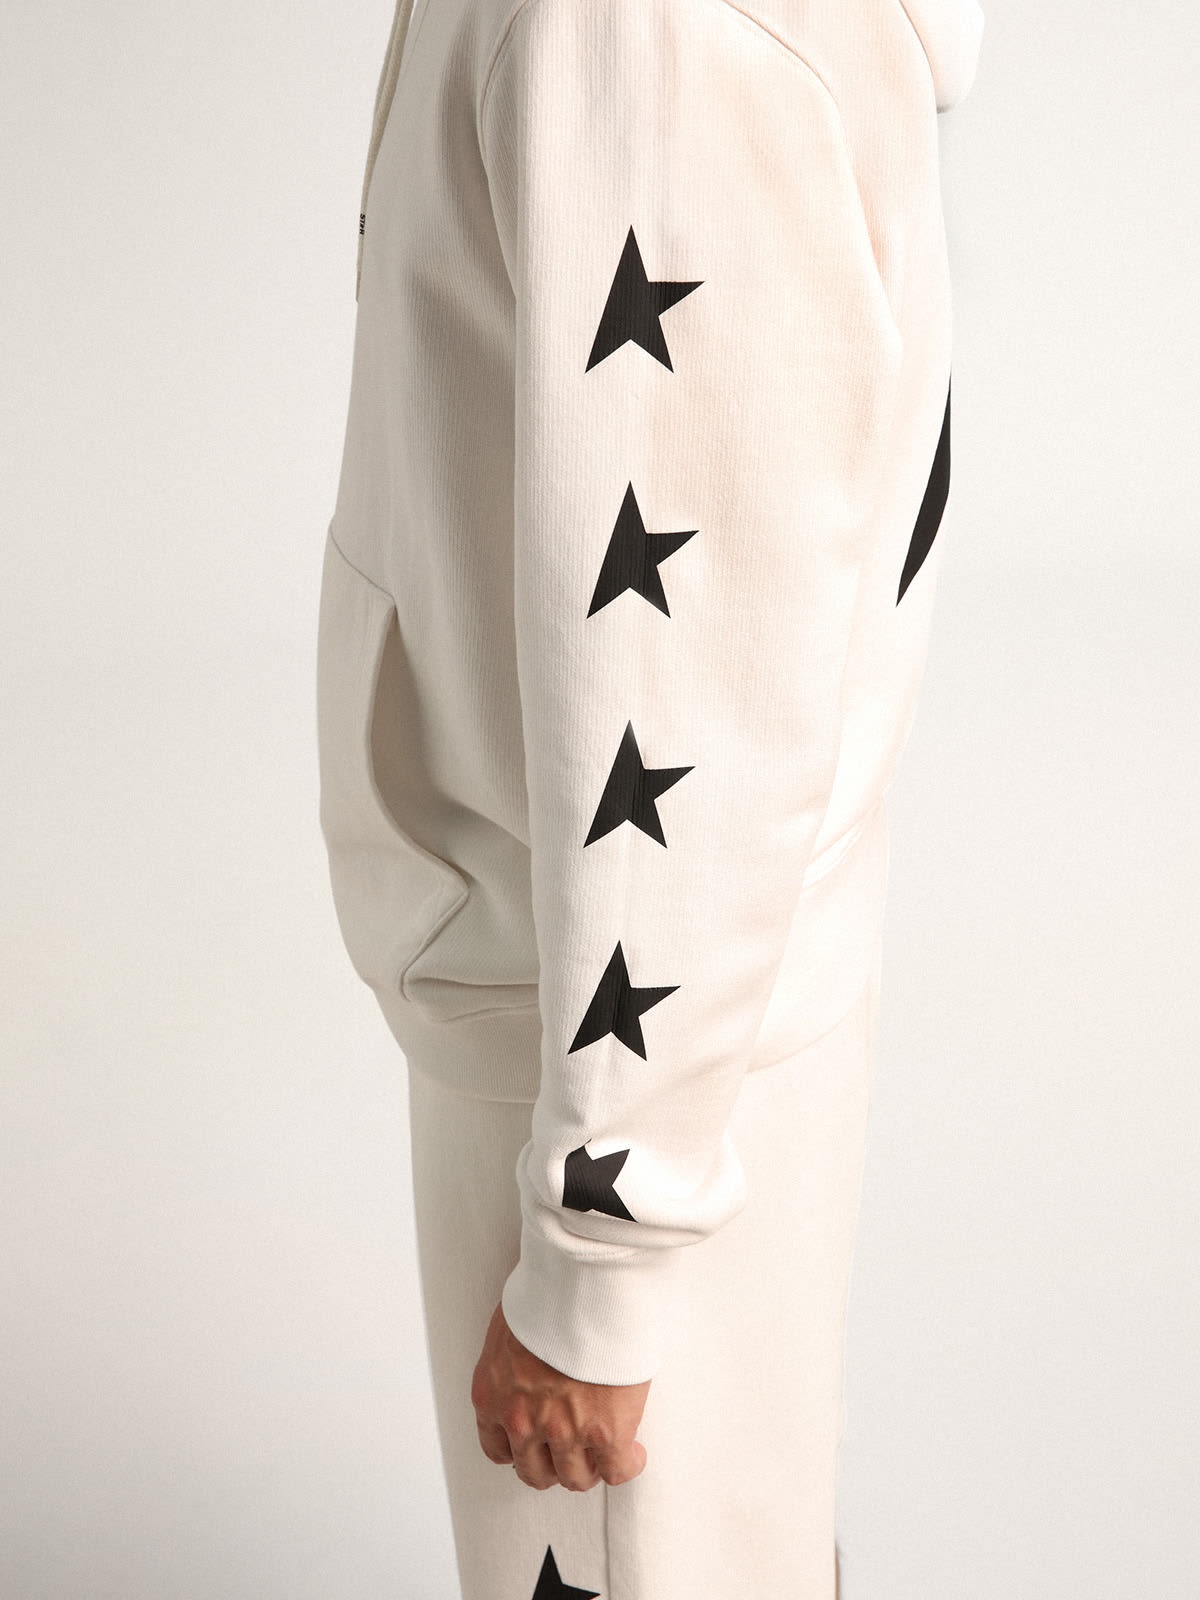 Alighiero Star Collection hooded sweatshirt in vintage white with contrasting black stars - 5